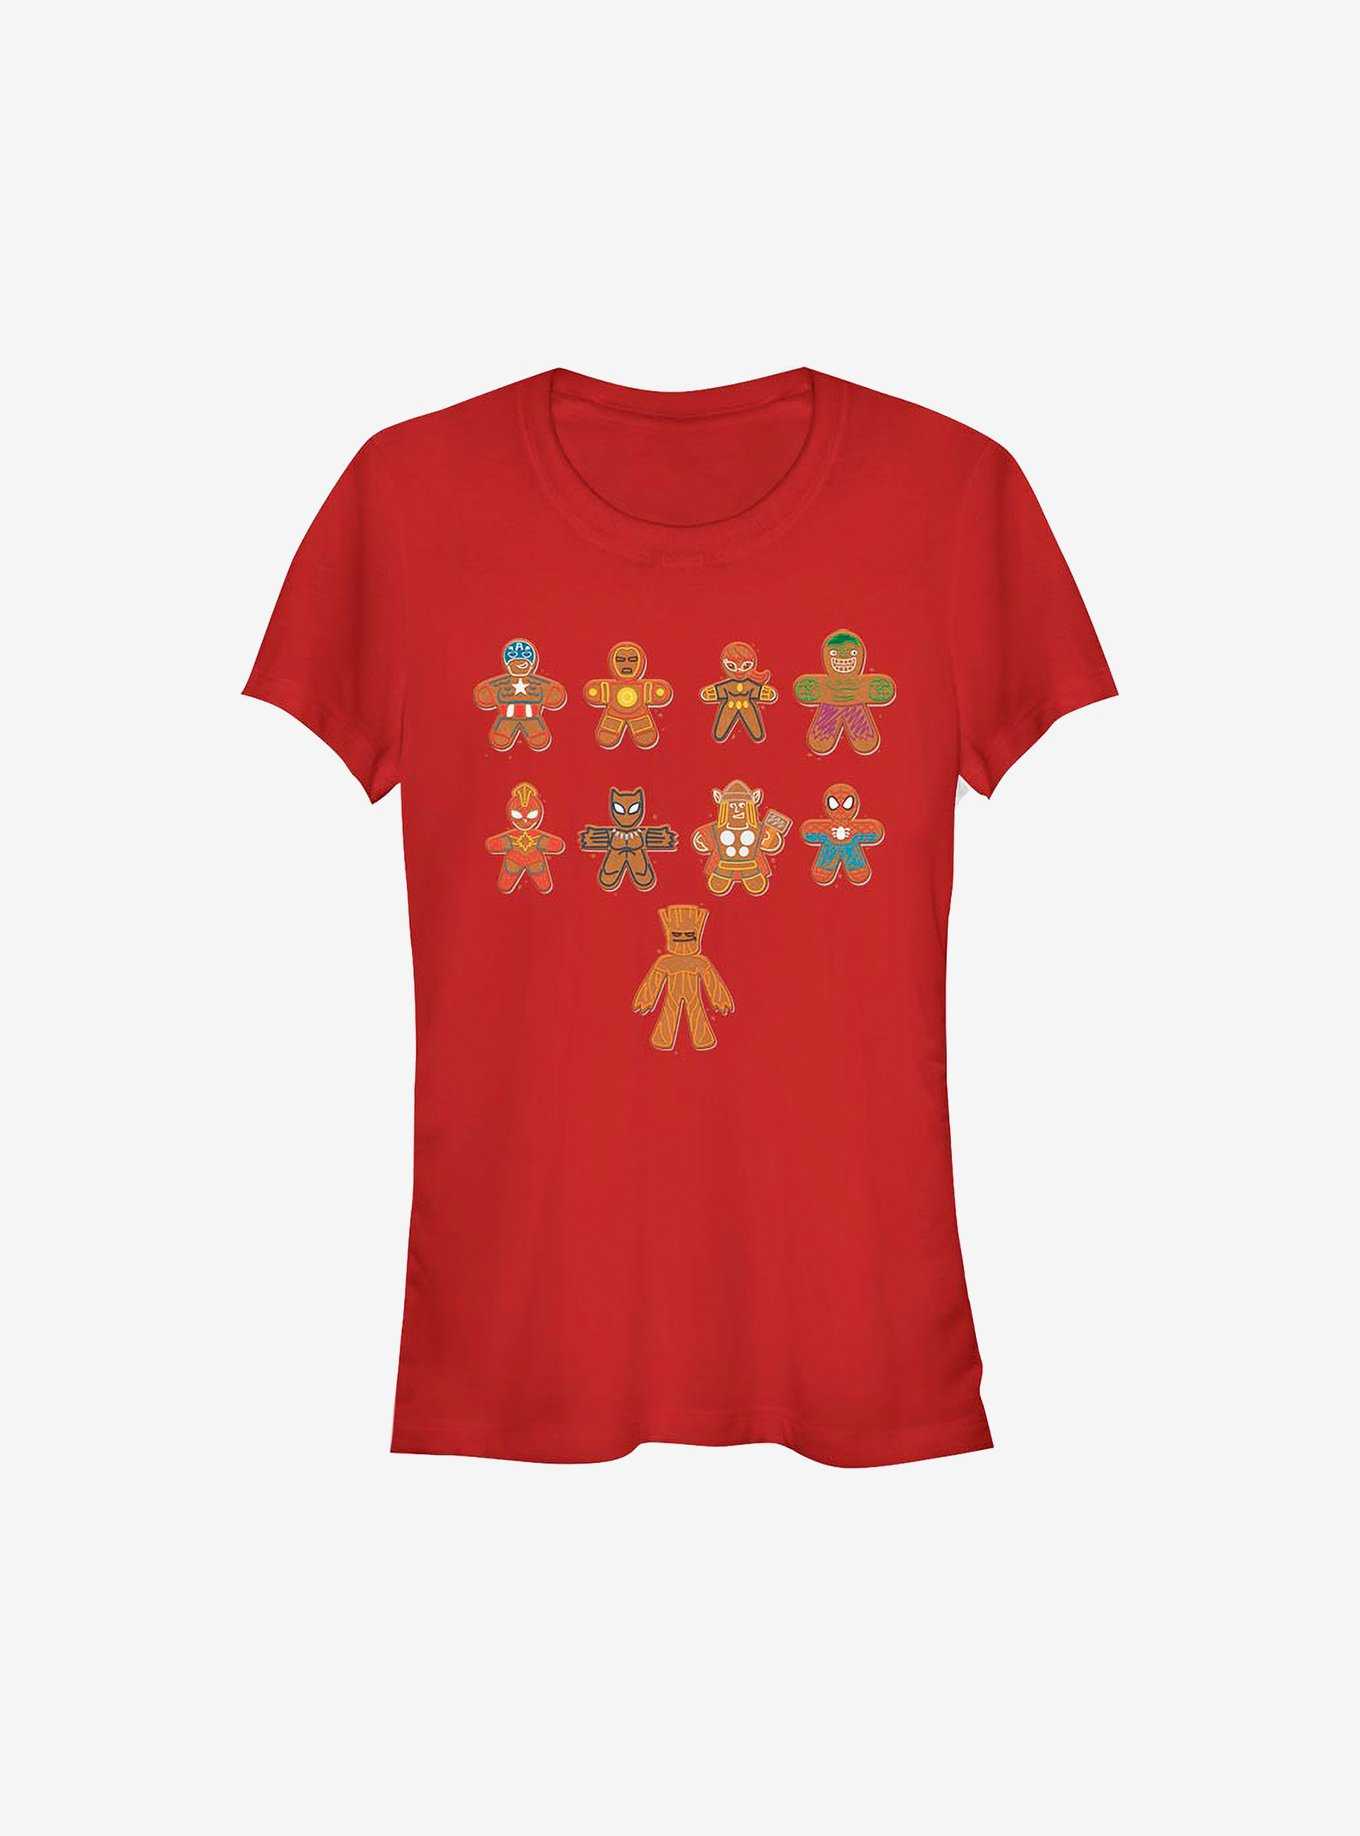 Marvel Avengers Lined Up Cookies Holiday Girls T-Shirt, , hi-res